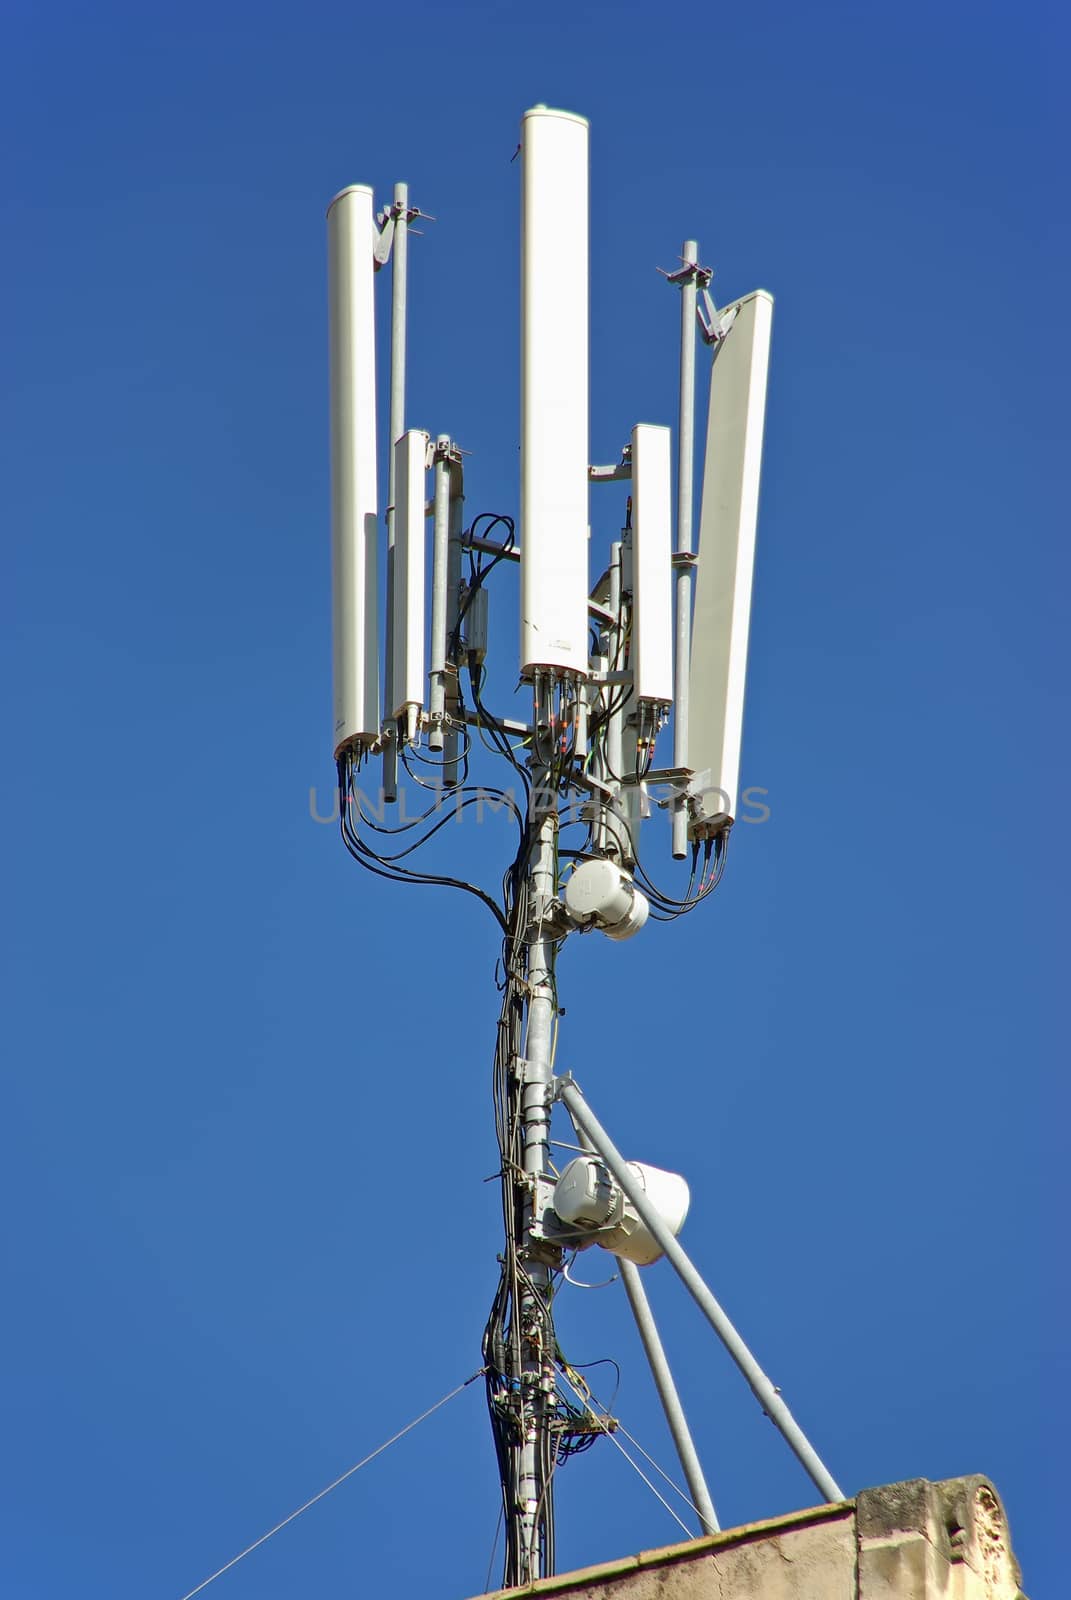 Antenna used to repeat the signal on a mobile telephony network